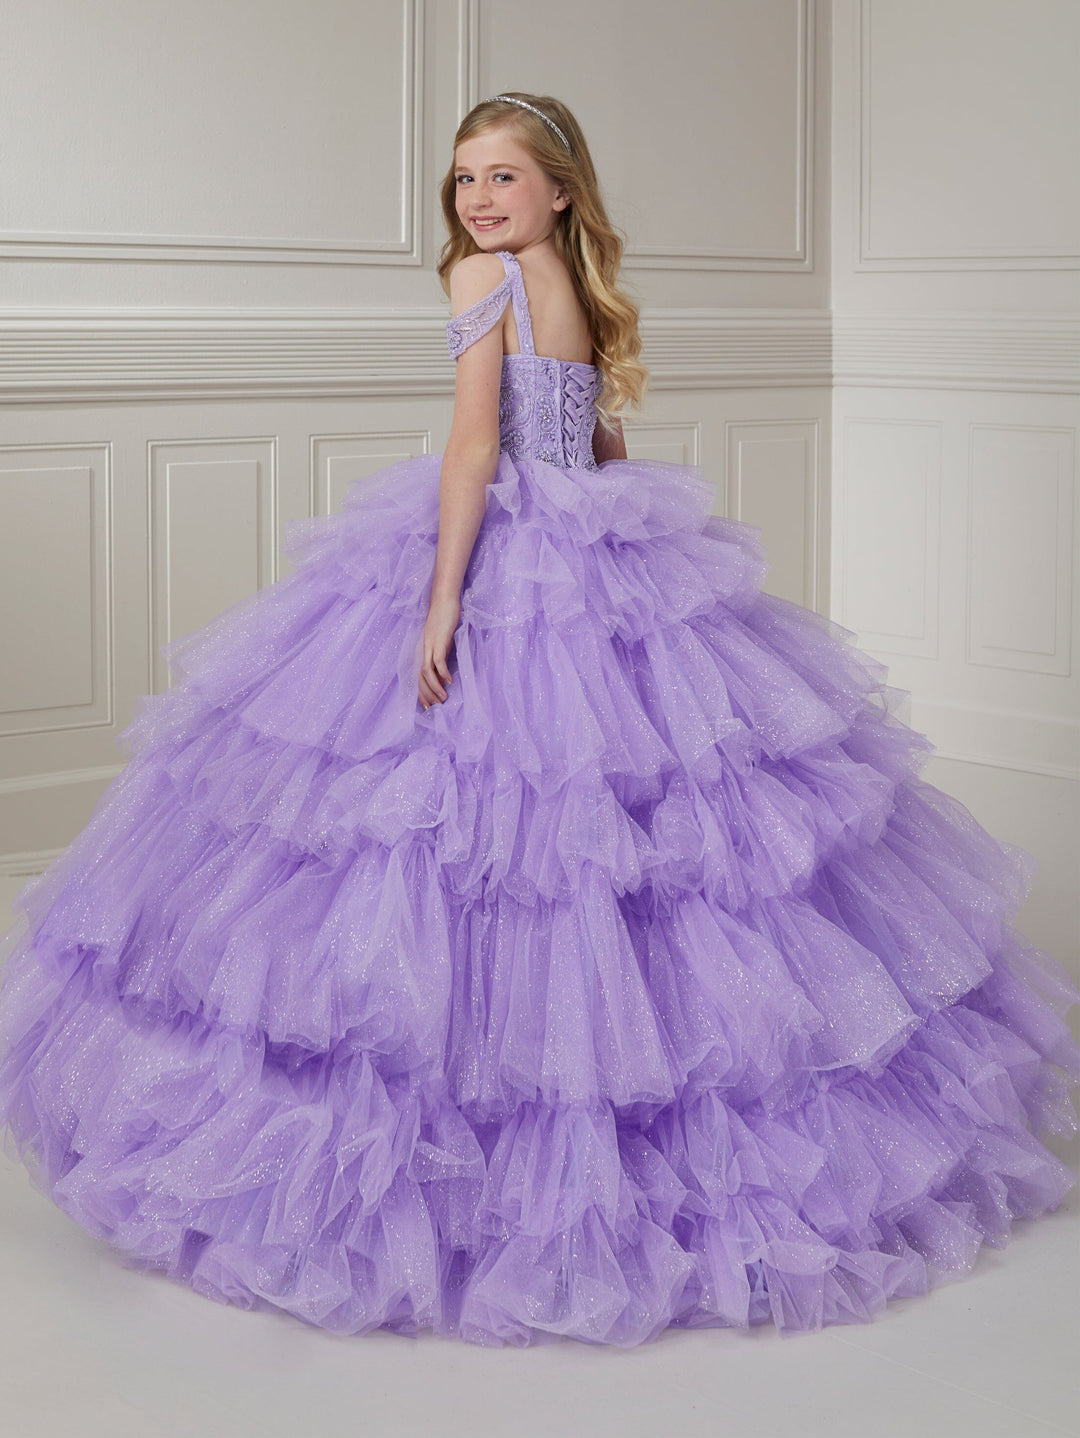 Girls Ruffled Cold Shoulder Gown by Tiffany Princess 13716